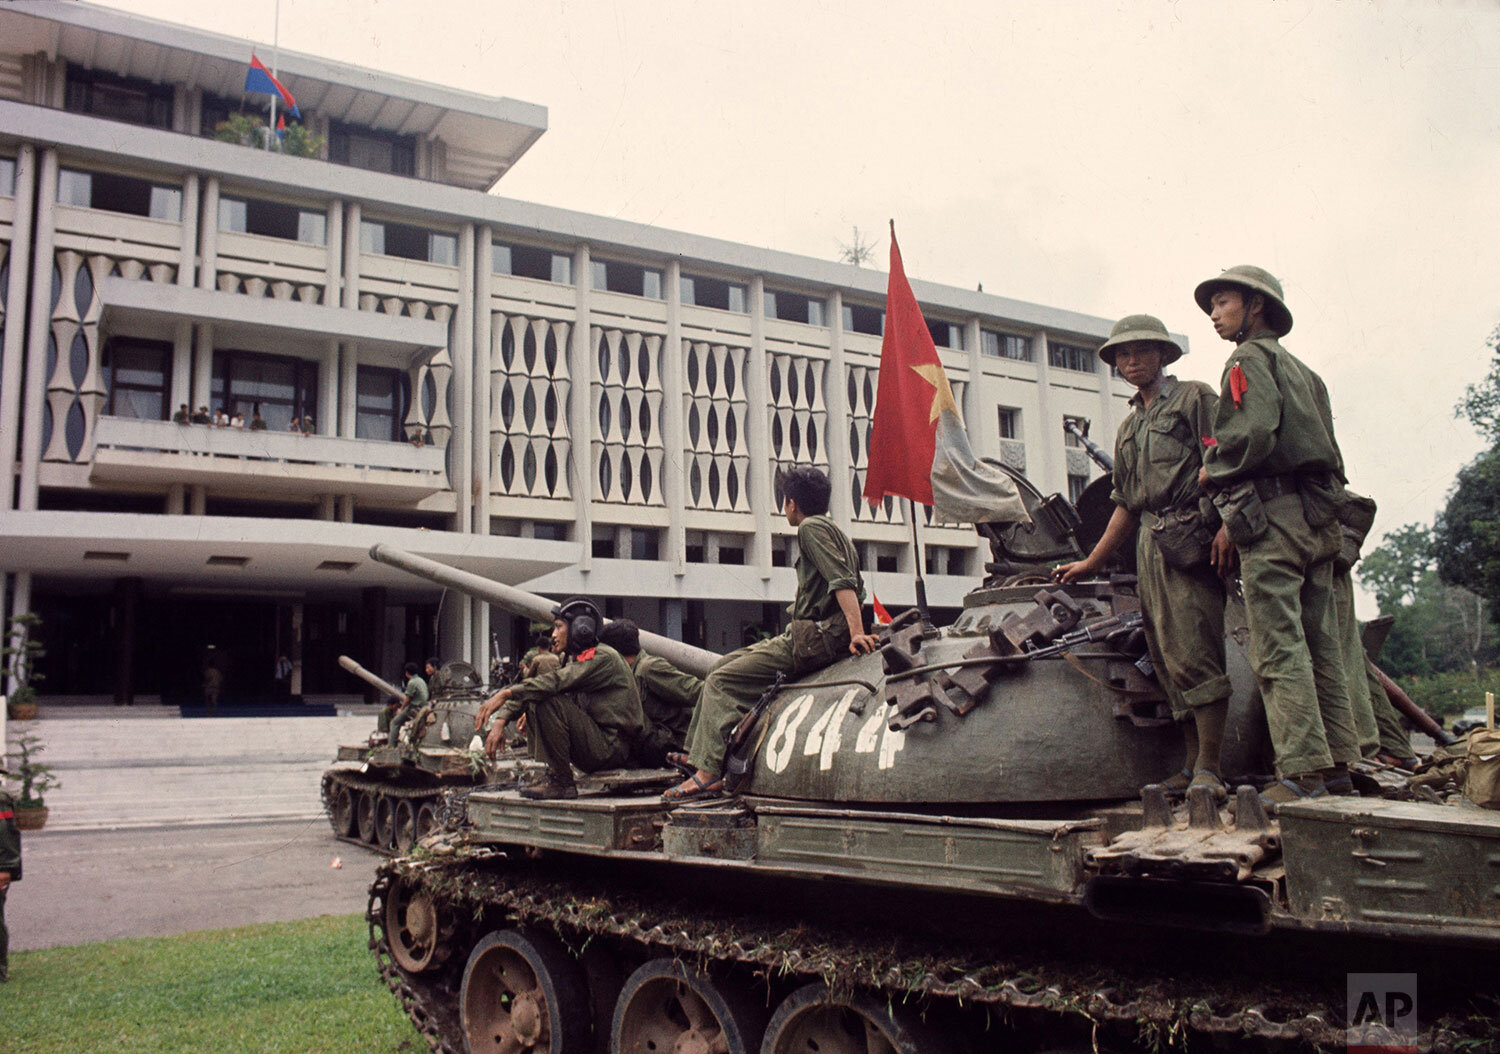  Victorious North Vietnamese troops on tanks take up positions outside Independence Palace in Saigon, April 30, 1975, the day the South Vietnamese government surrendered, ending the Vietnam War. (AP Photo/Yves Billy) 